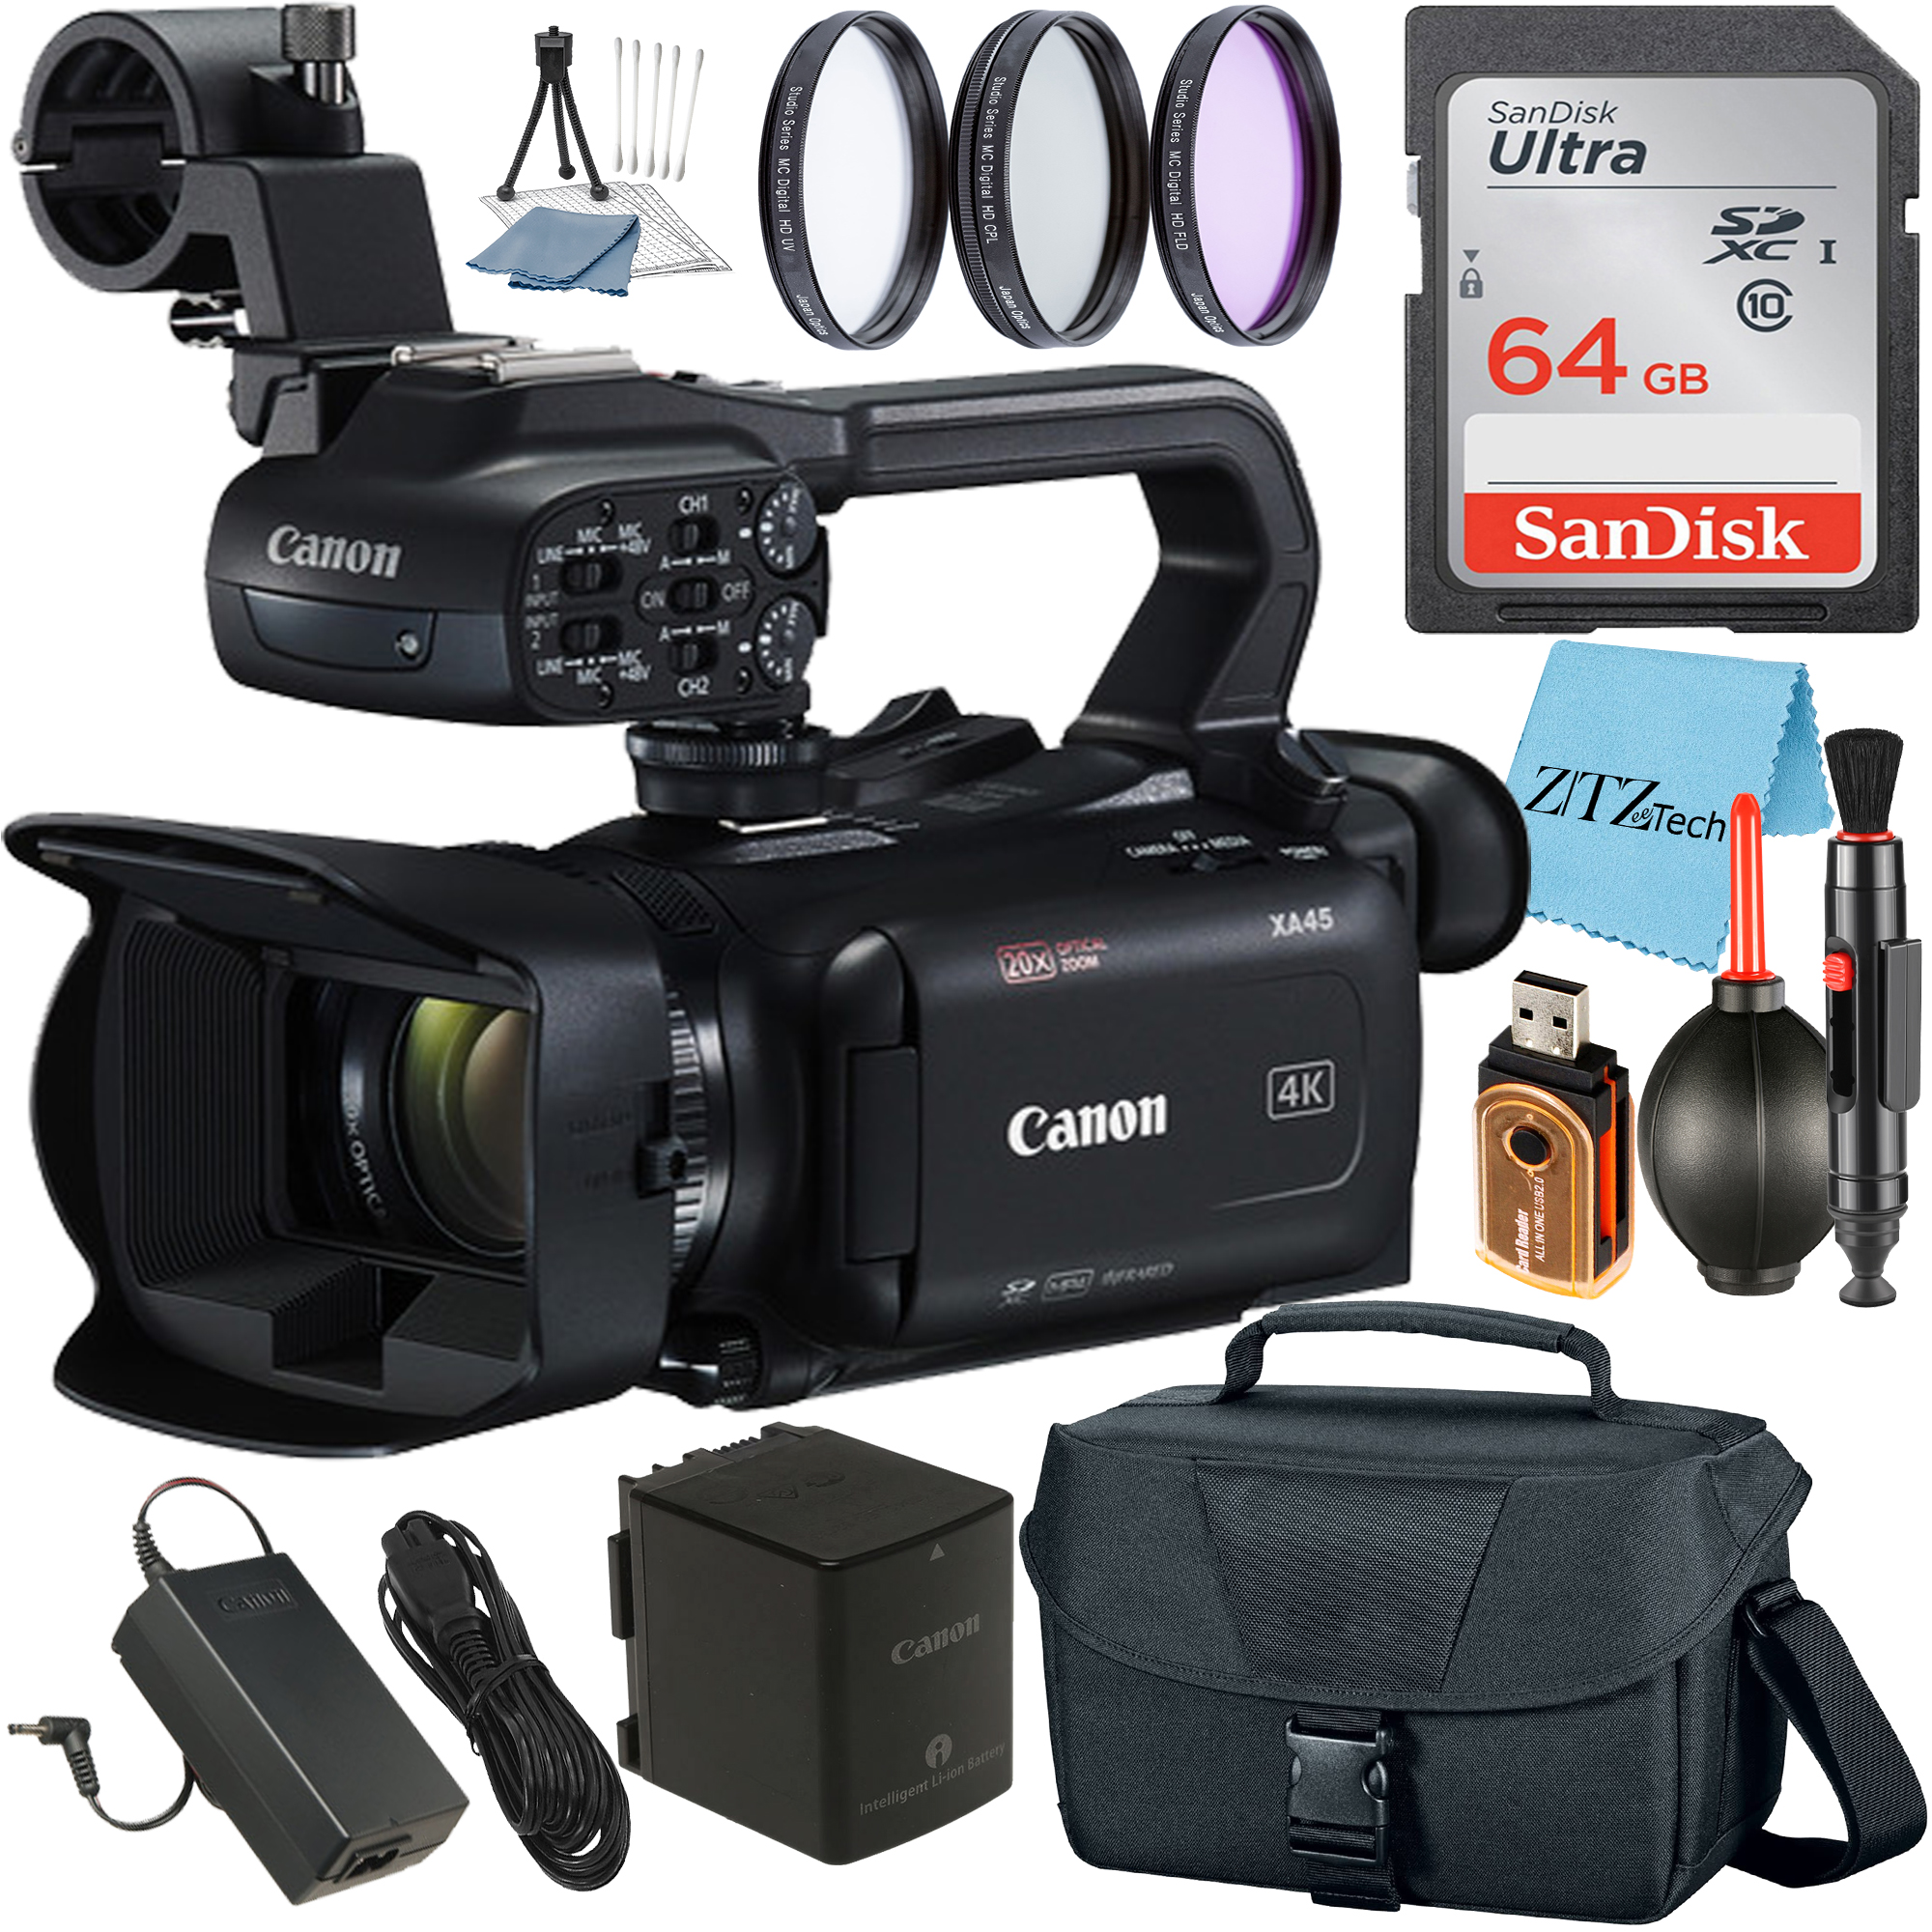 Canon XA45 Professional UHD 4K Video Camcorder with 64GB SanDisk Memory Card + Case + Filter + ZeeTech Accessory